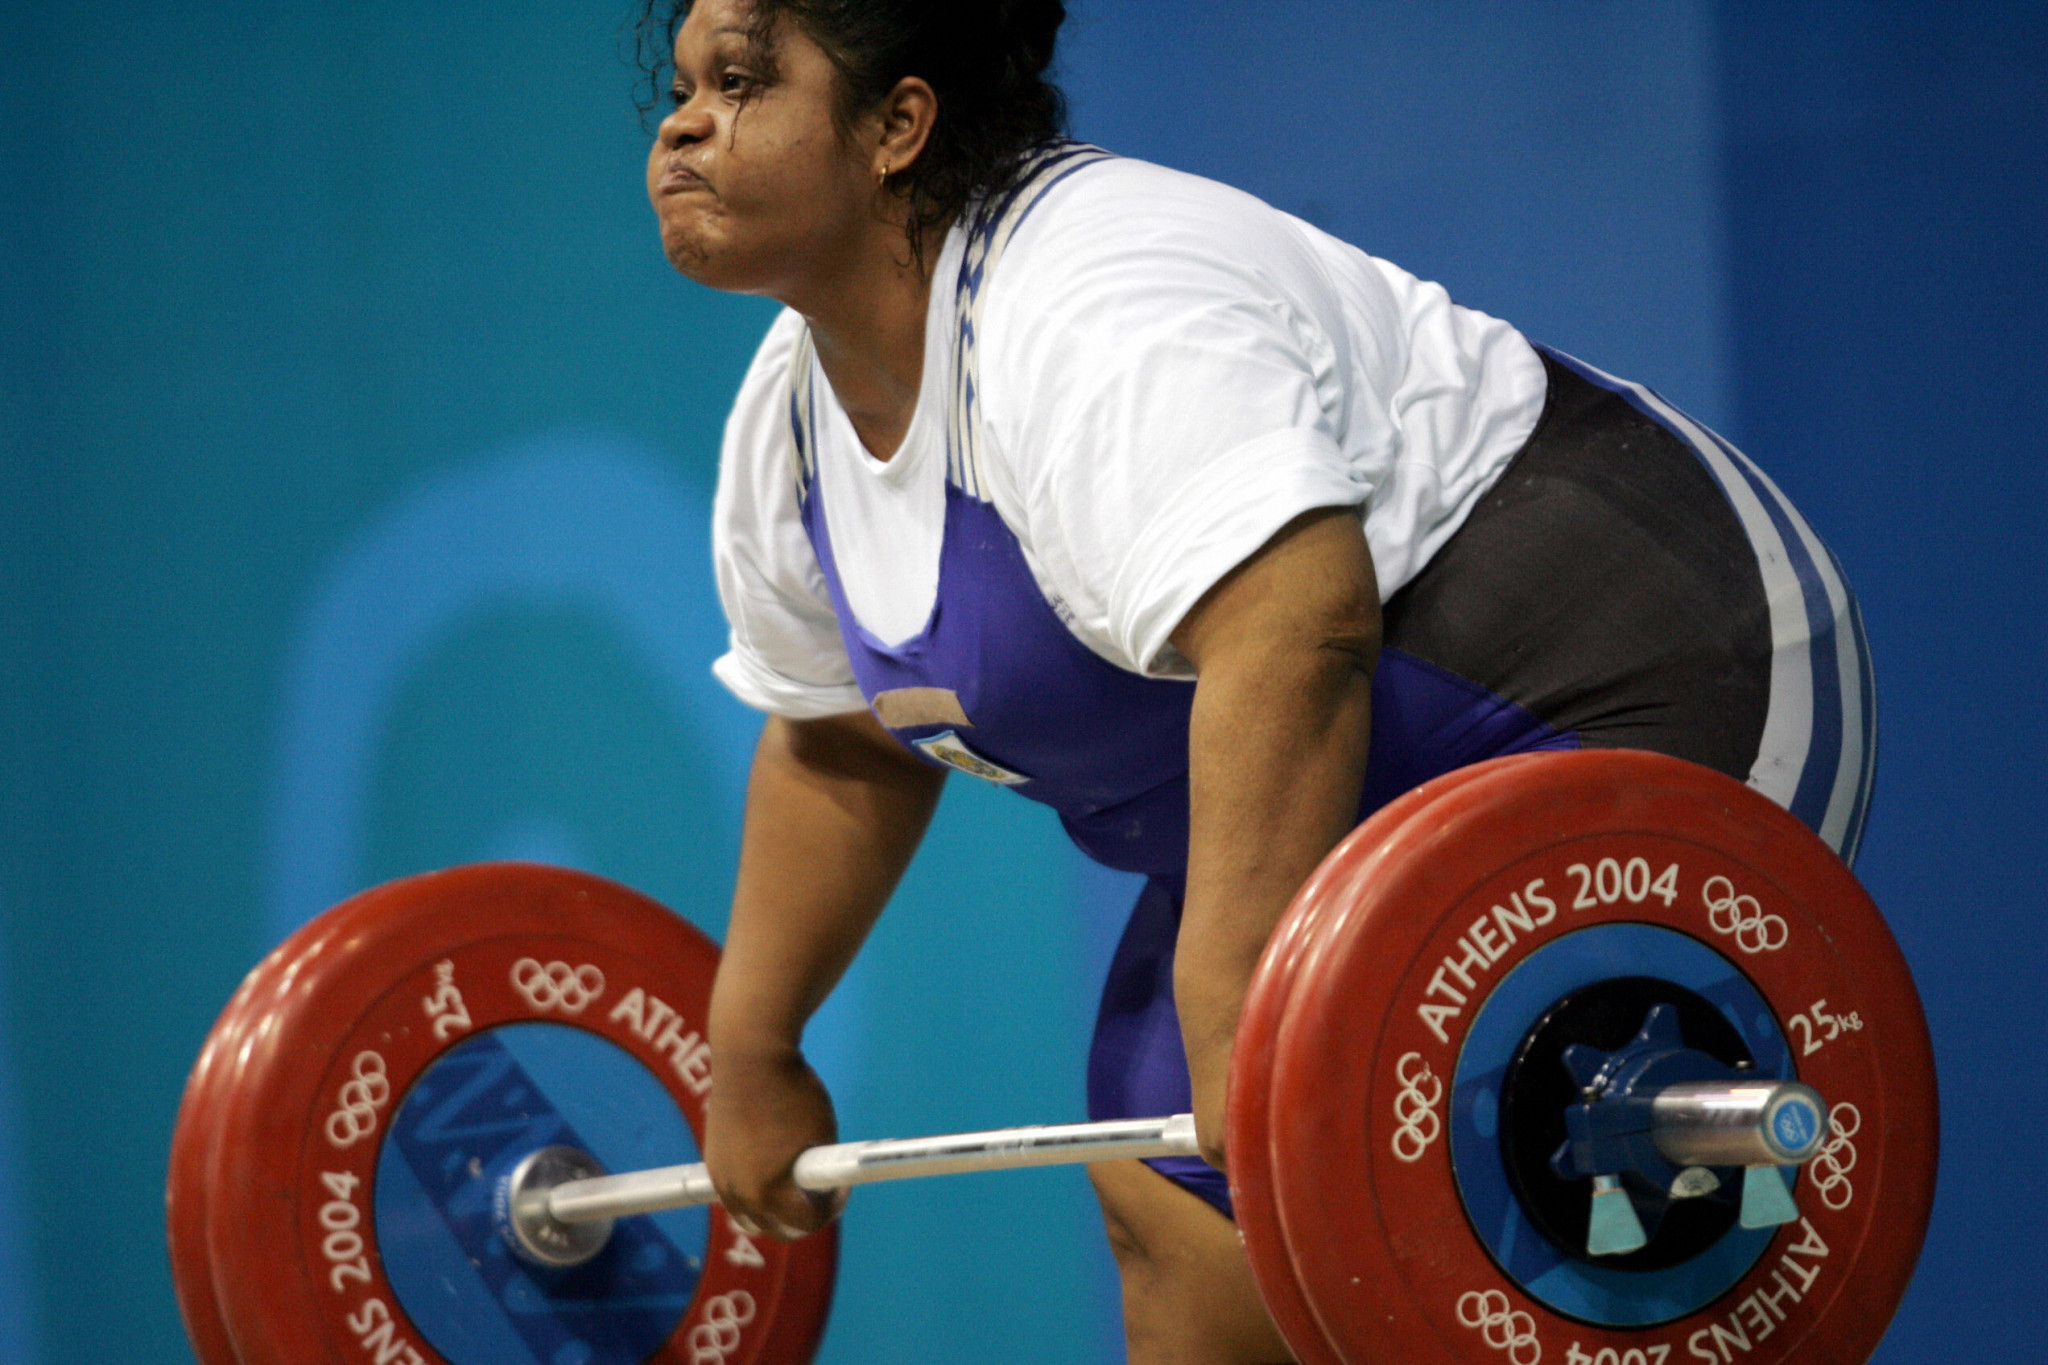 Nauru's Reanna Solomon retired from weightlifting after competing at the 2004 Olympic Games in Athens ©Getty Images